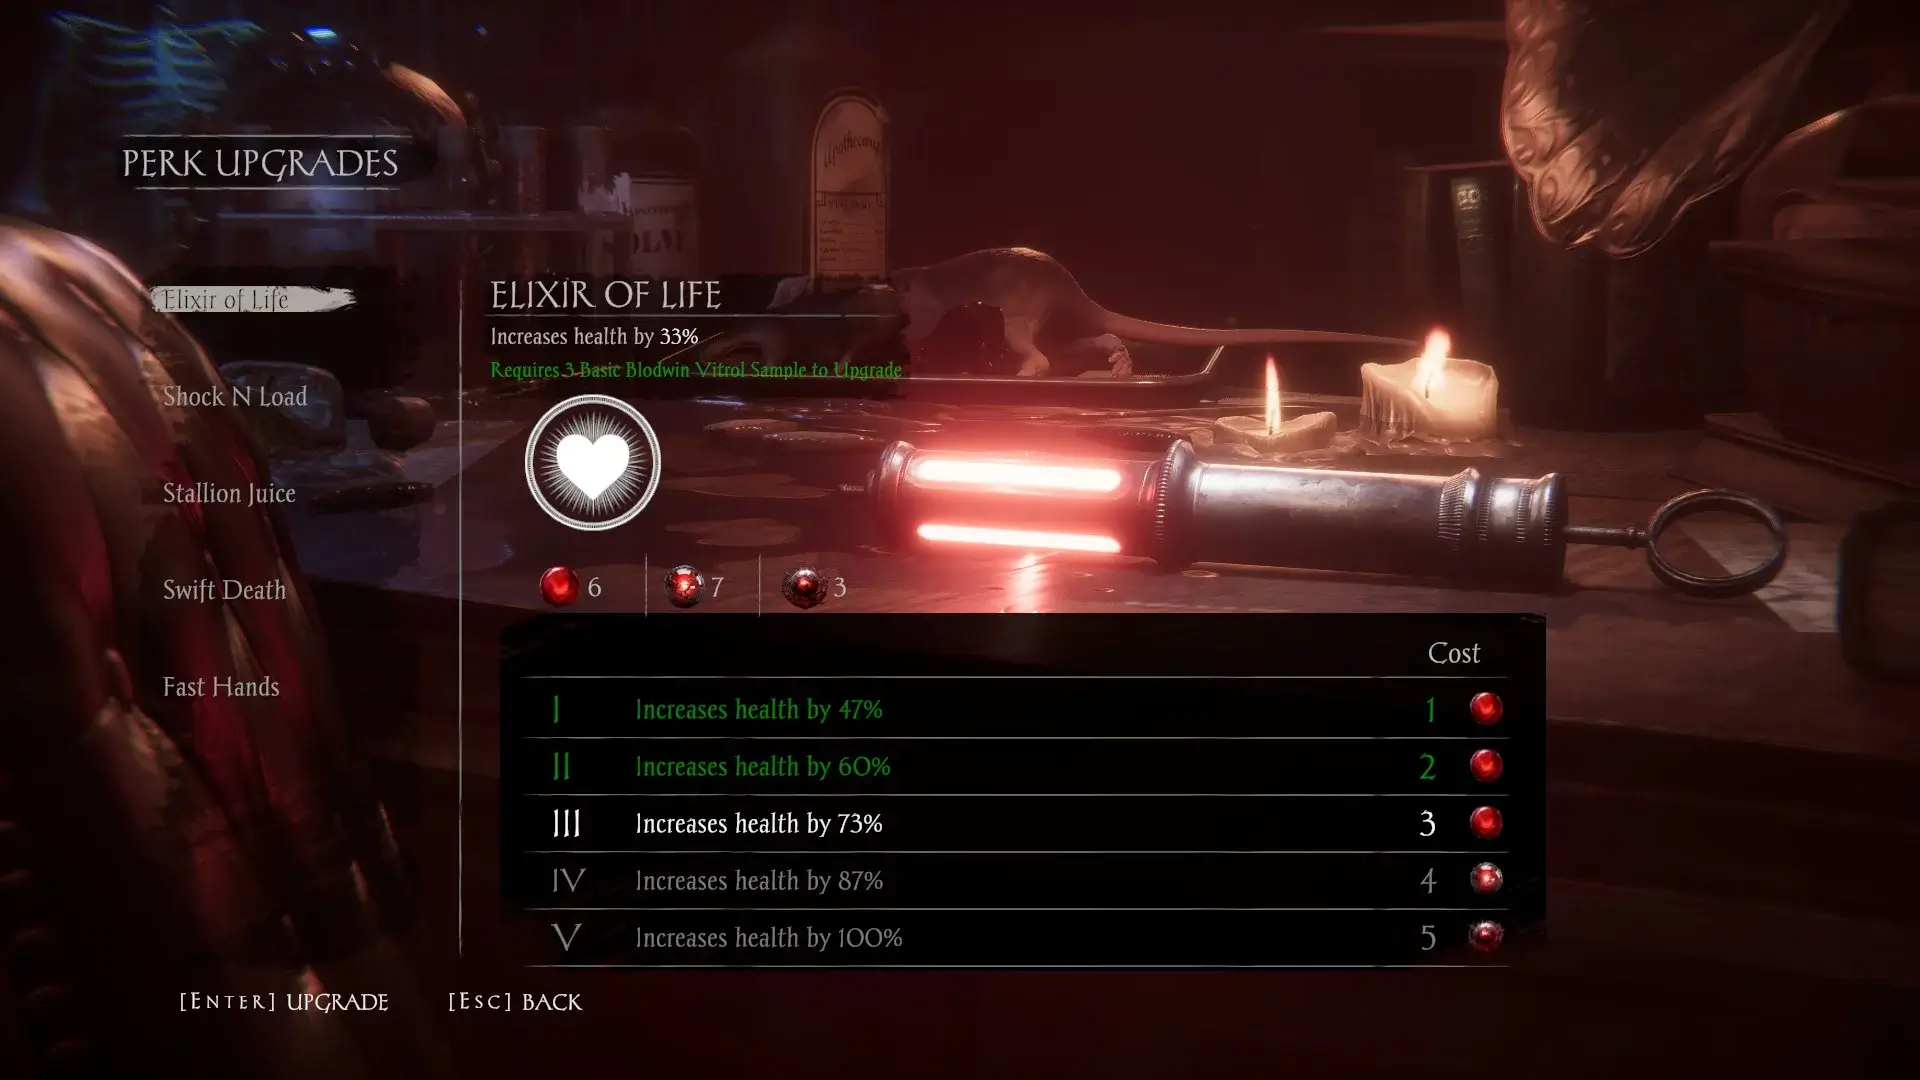 The perk menu found in the game. The item on the table glowing red is a syringe that the player uses. Below is the upgrade list and how many upgrade points I have. I have purchased two of the five upgrades for the perk "Elixer of Life.